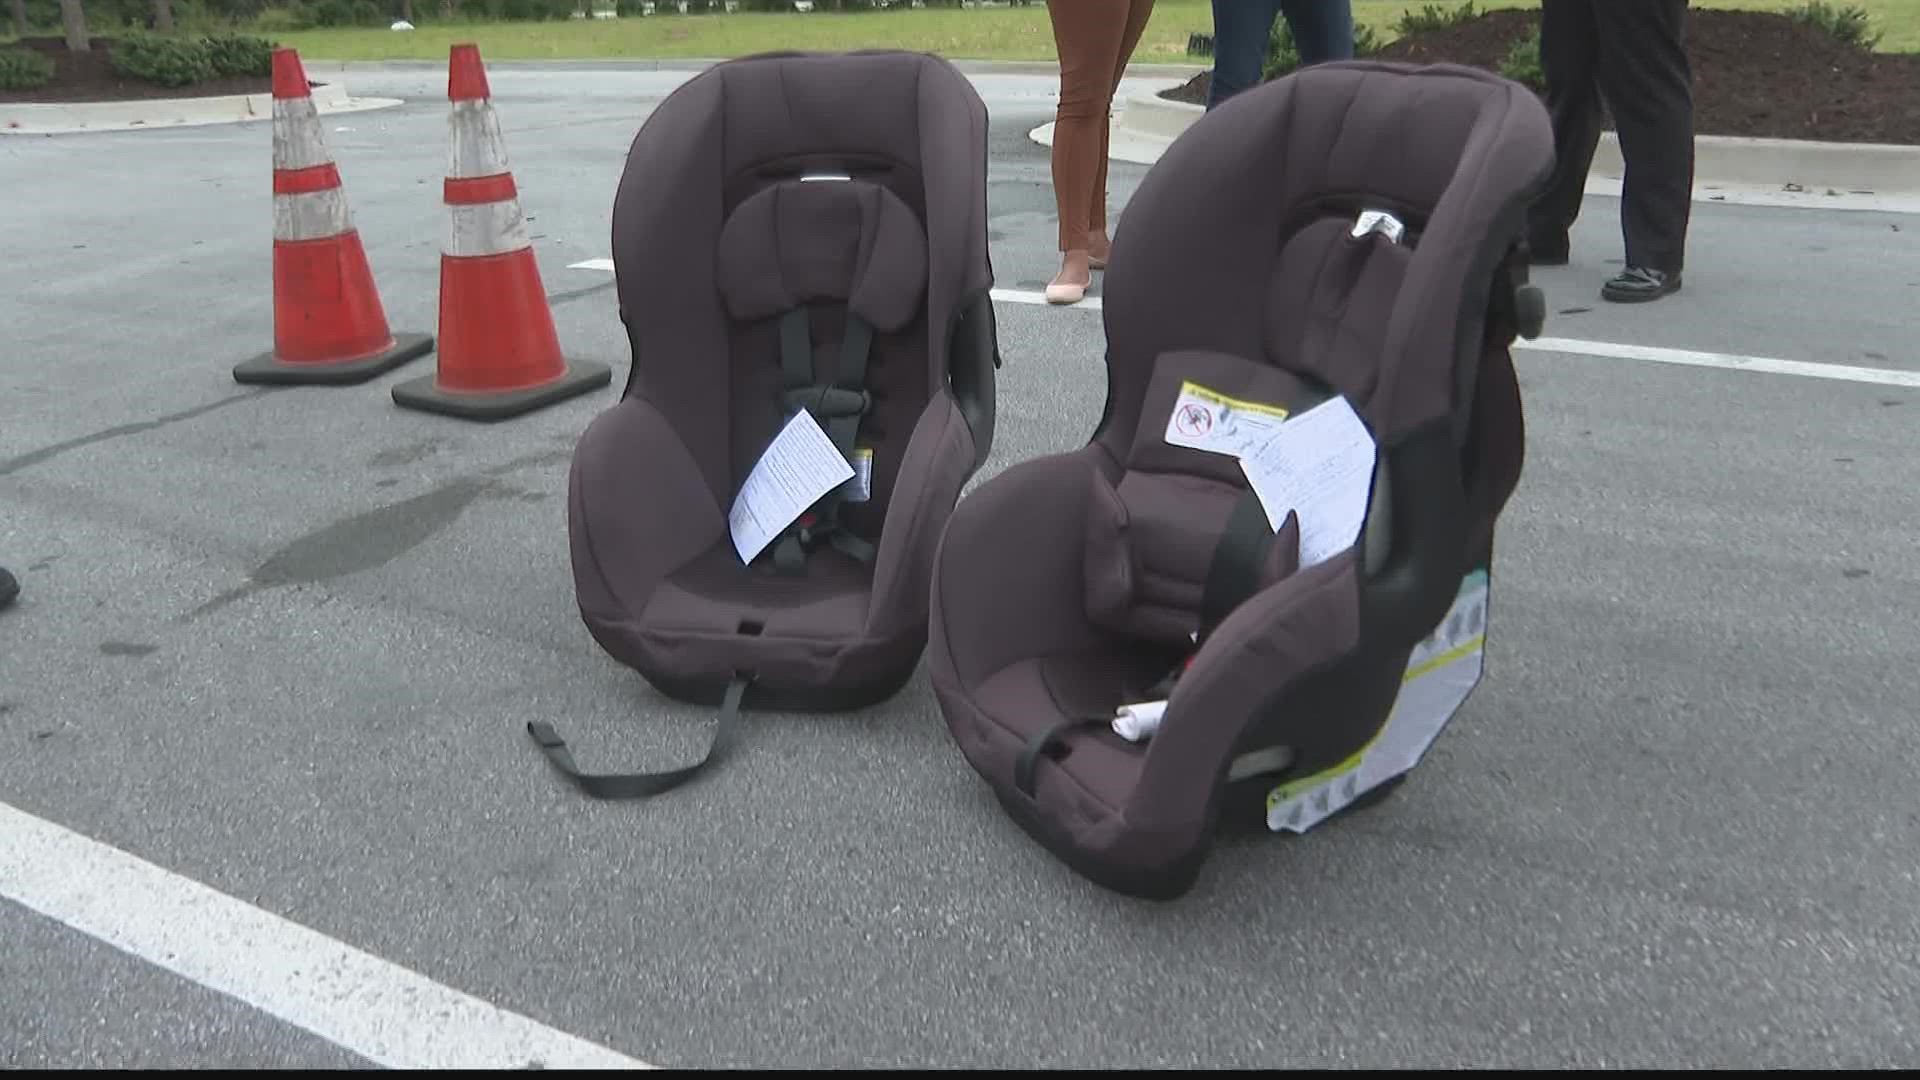 They help educate parents about reliable car seats. And what works best for each individual child -- based on age, weight and height.